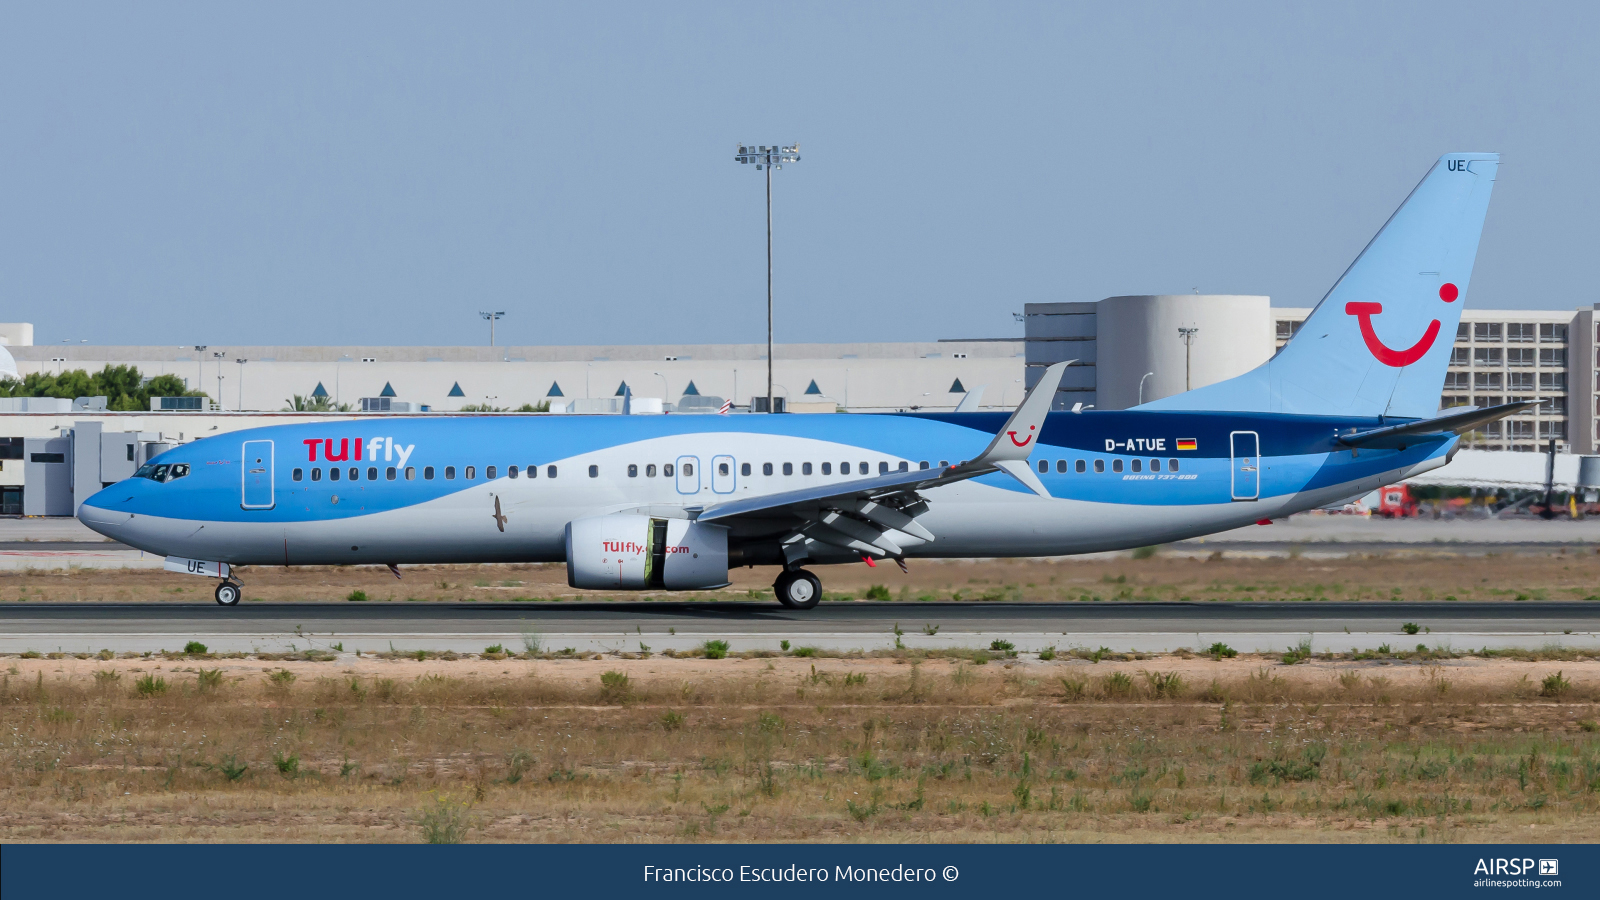 Tui Fly  Boeing 737-800  D-ATUE